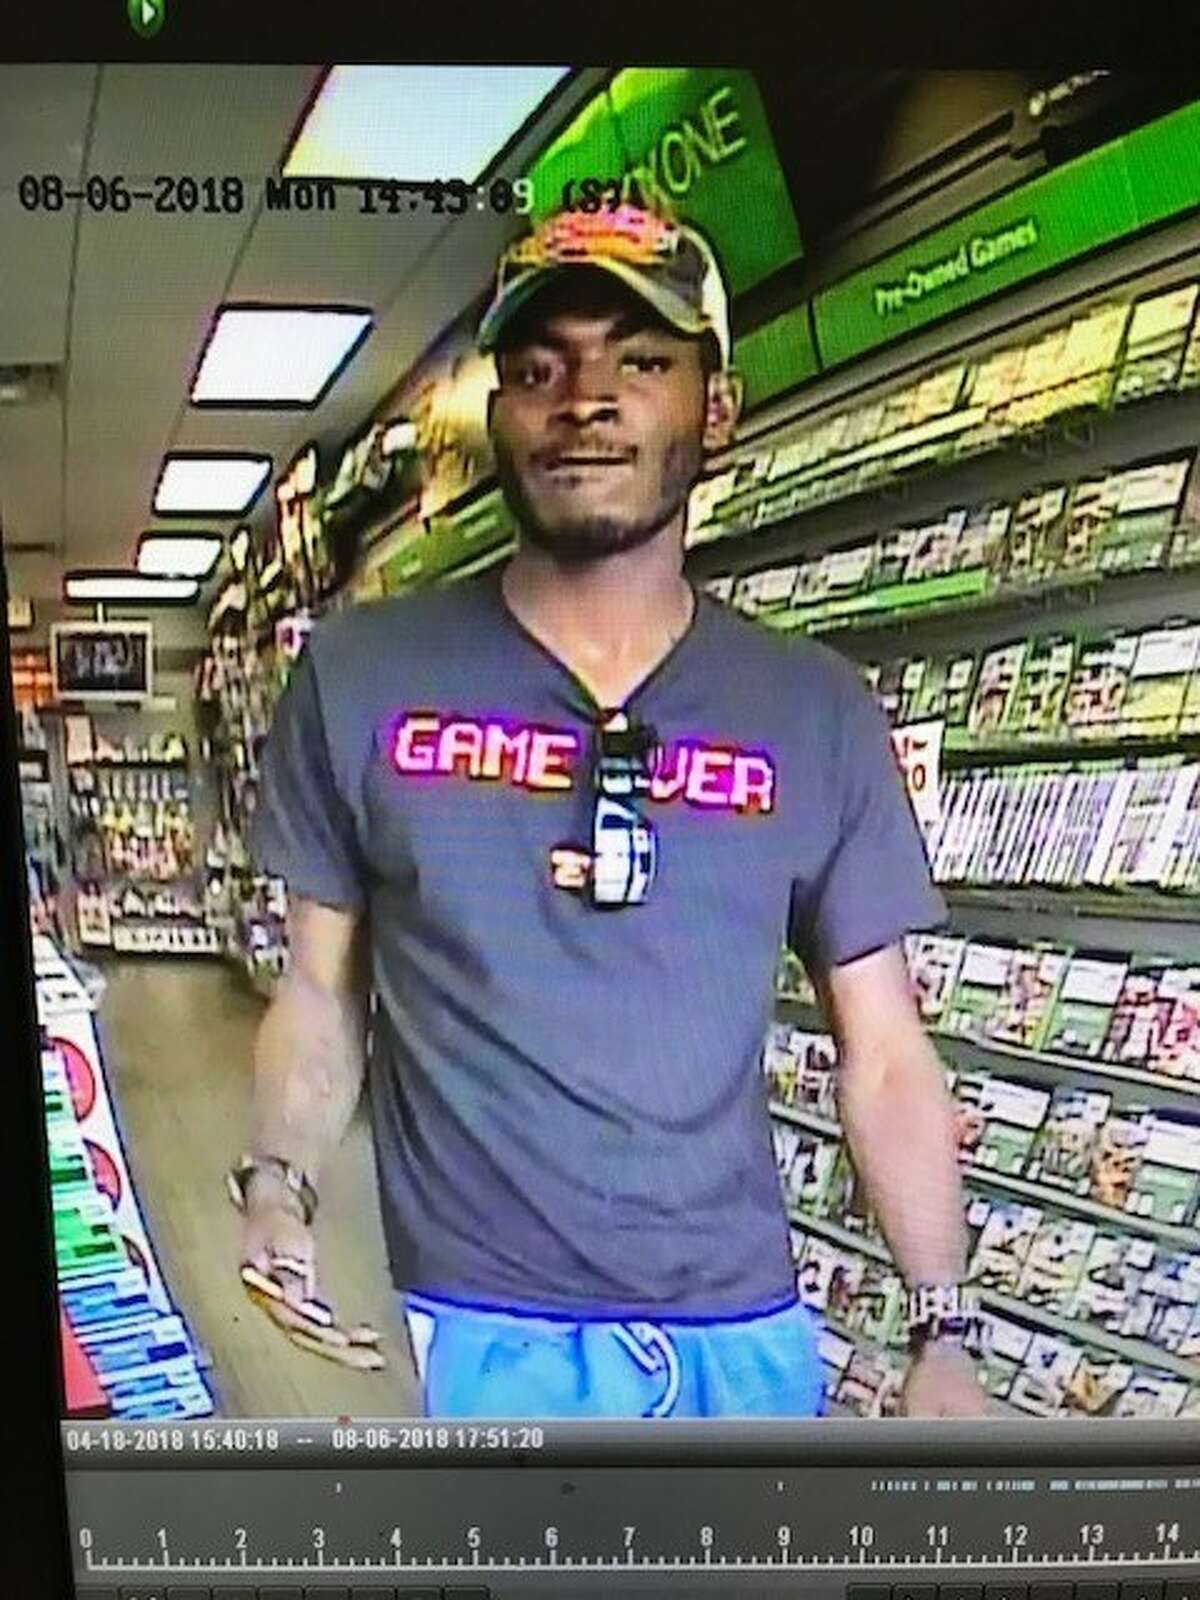 The suspect pictured was caught on surveillance camera, allegedly attempting to make a video game console purchase with a credit card stolen during an Aug. 6, 2018 vehicle burglary in Friendswood.